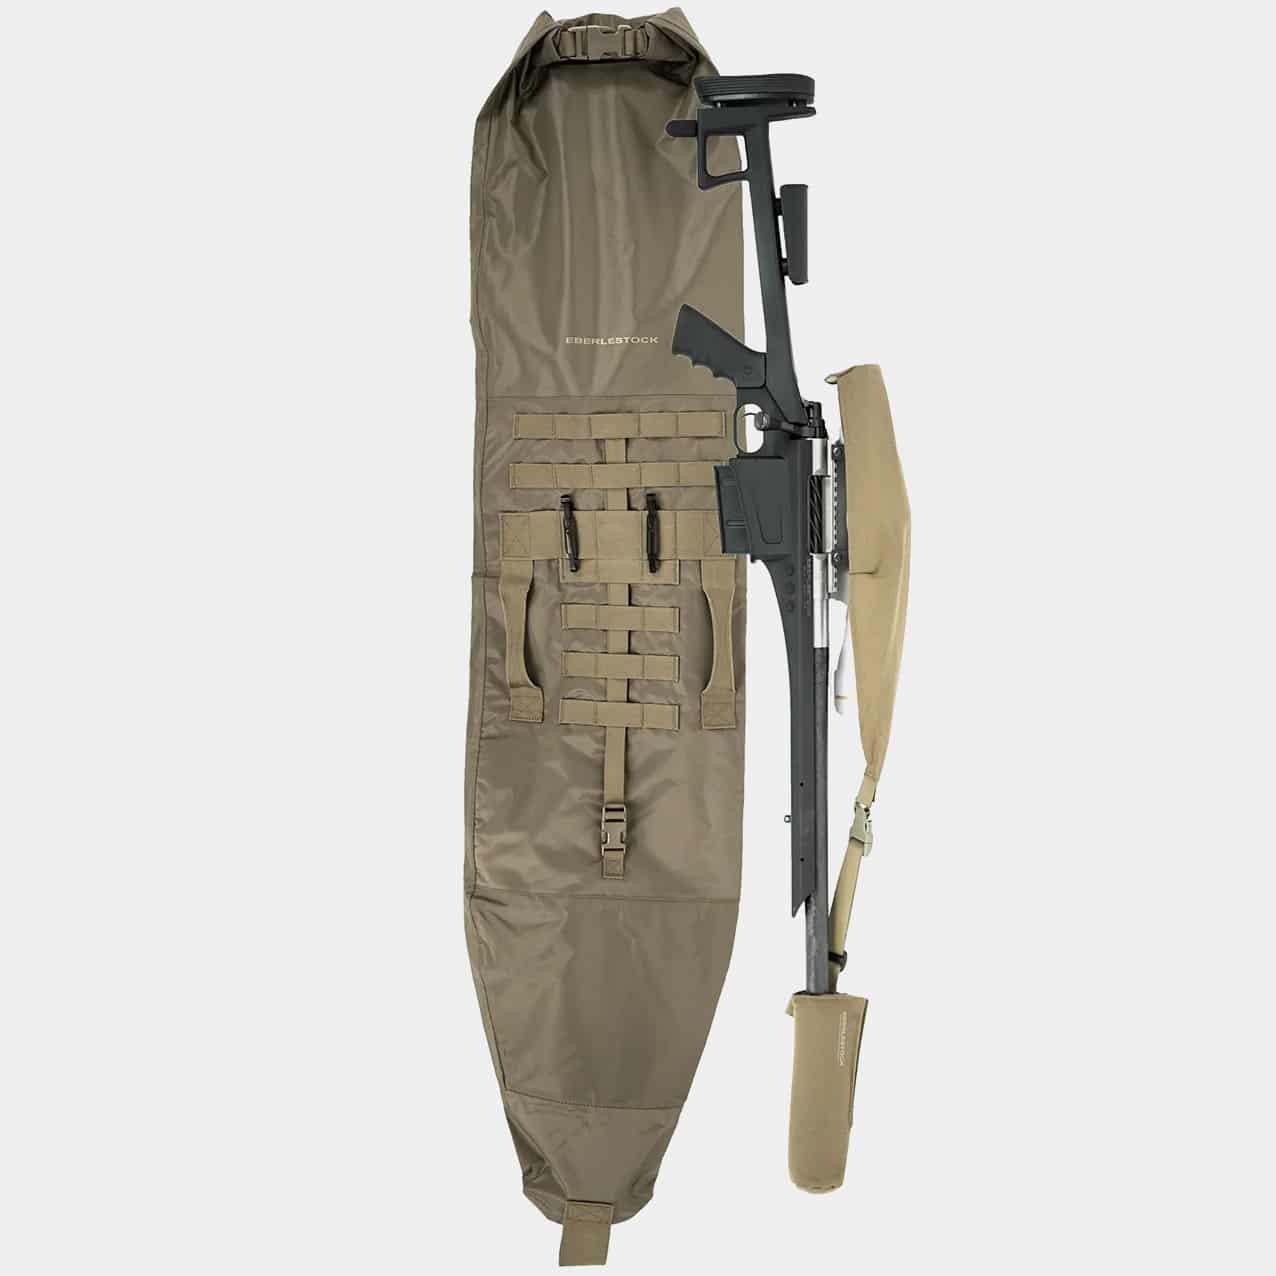 Eberlestock Rifle Dry Bag Scabbard with Crown Shield